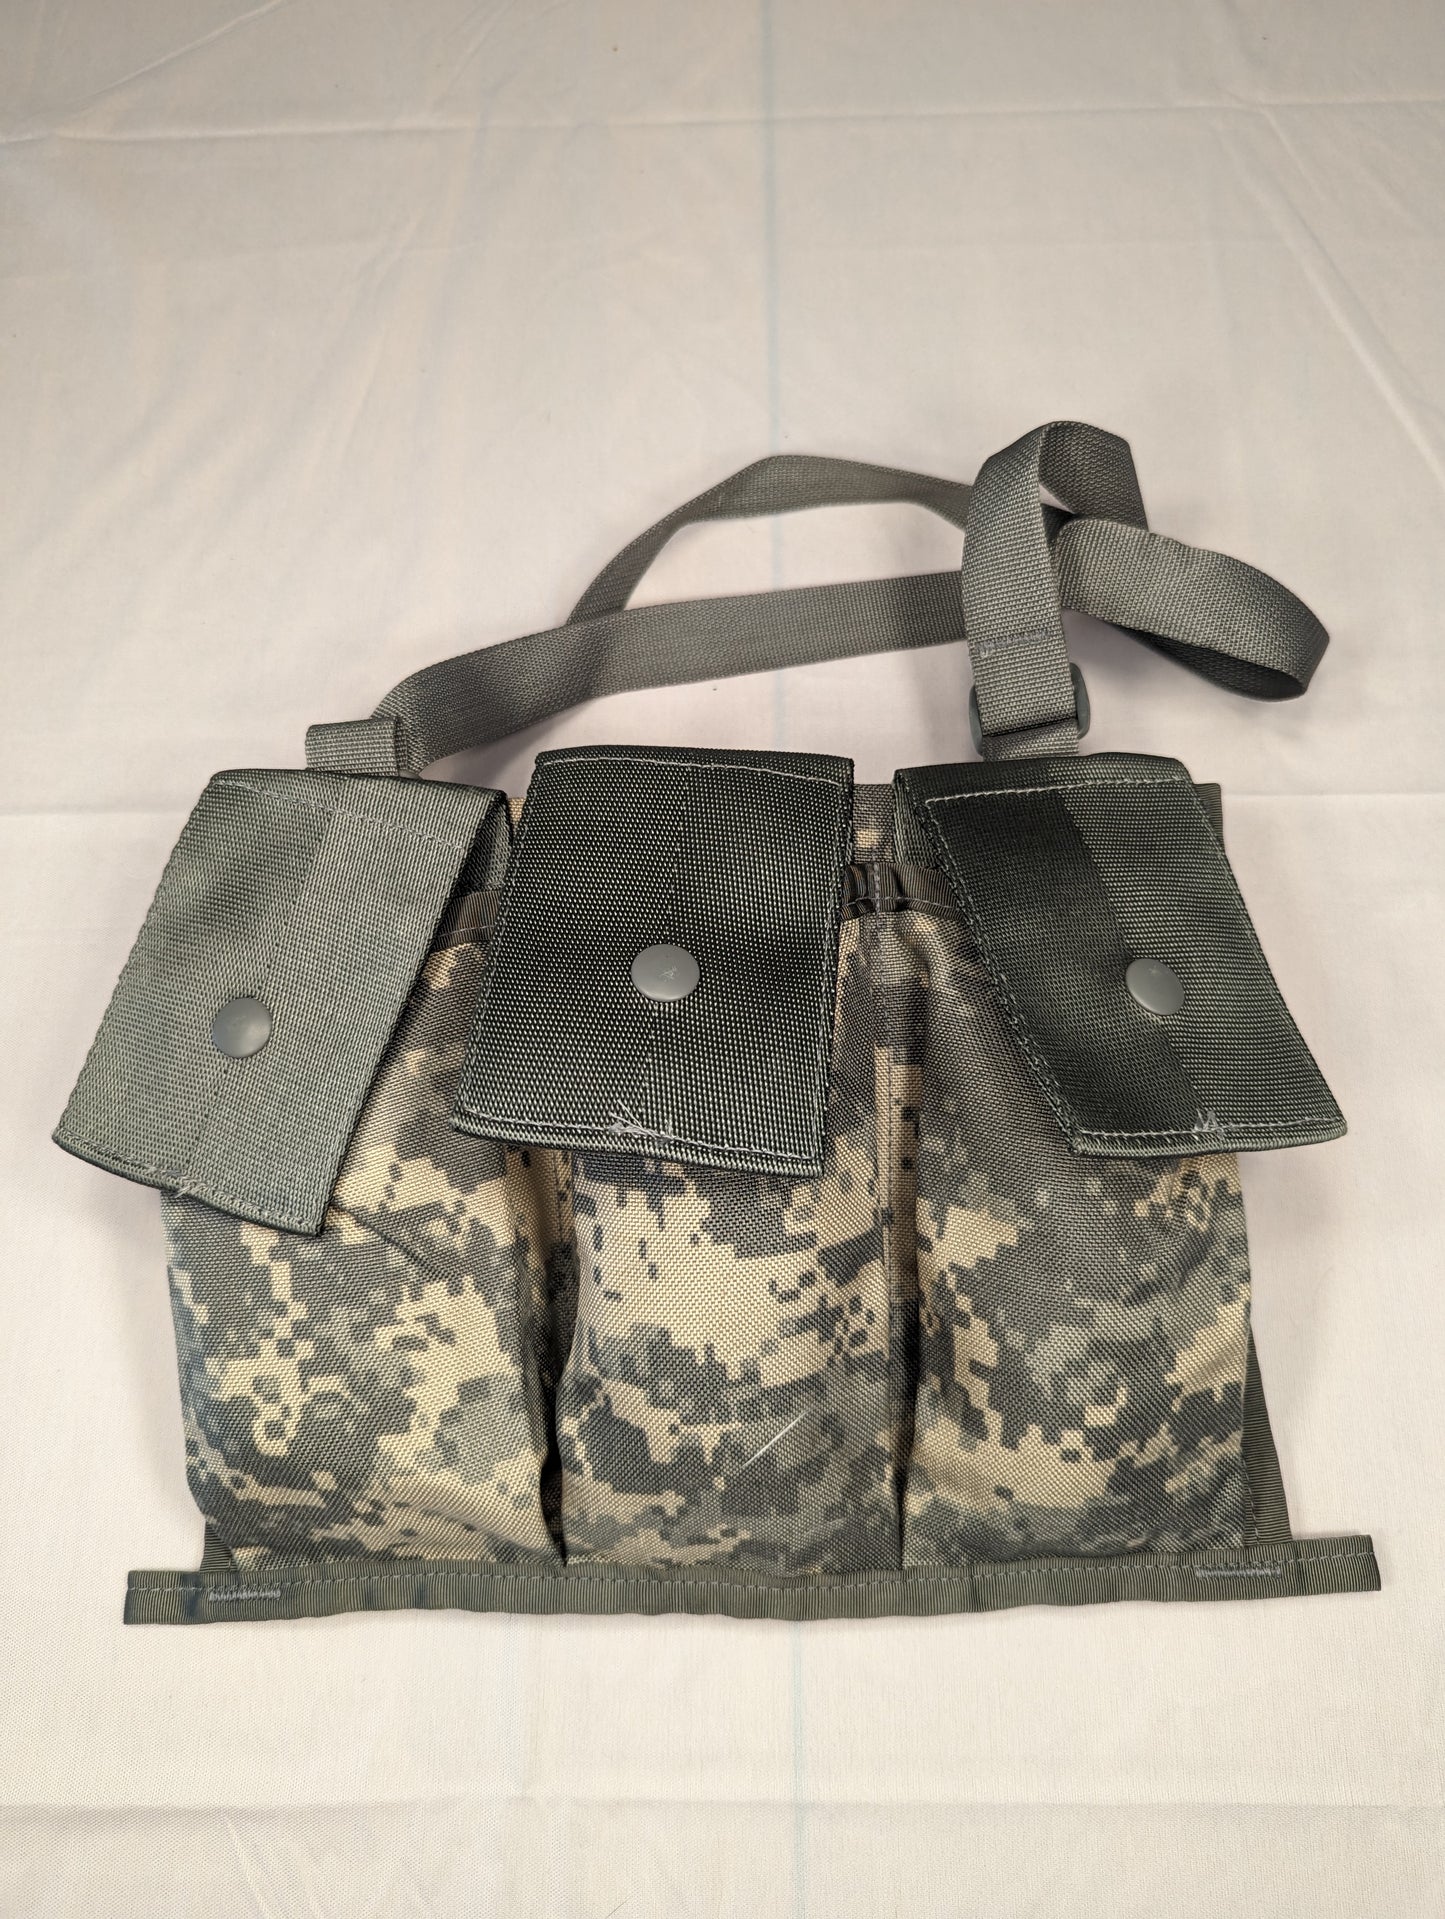 2 ACU Bandoleer Pouch 6 Mag MOLLE Mag Military Army Pouches Camo